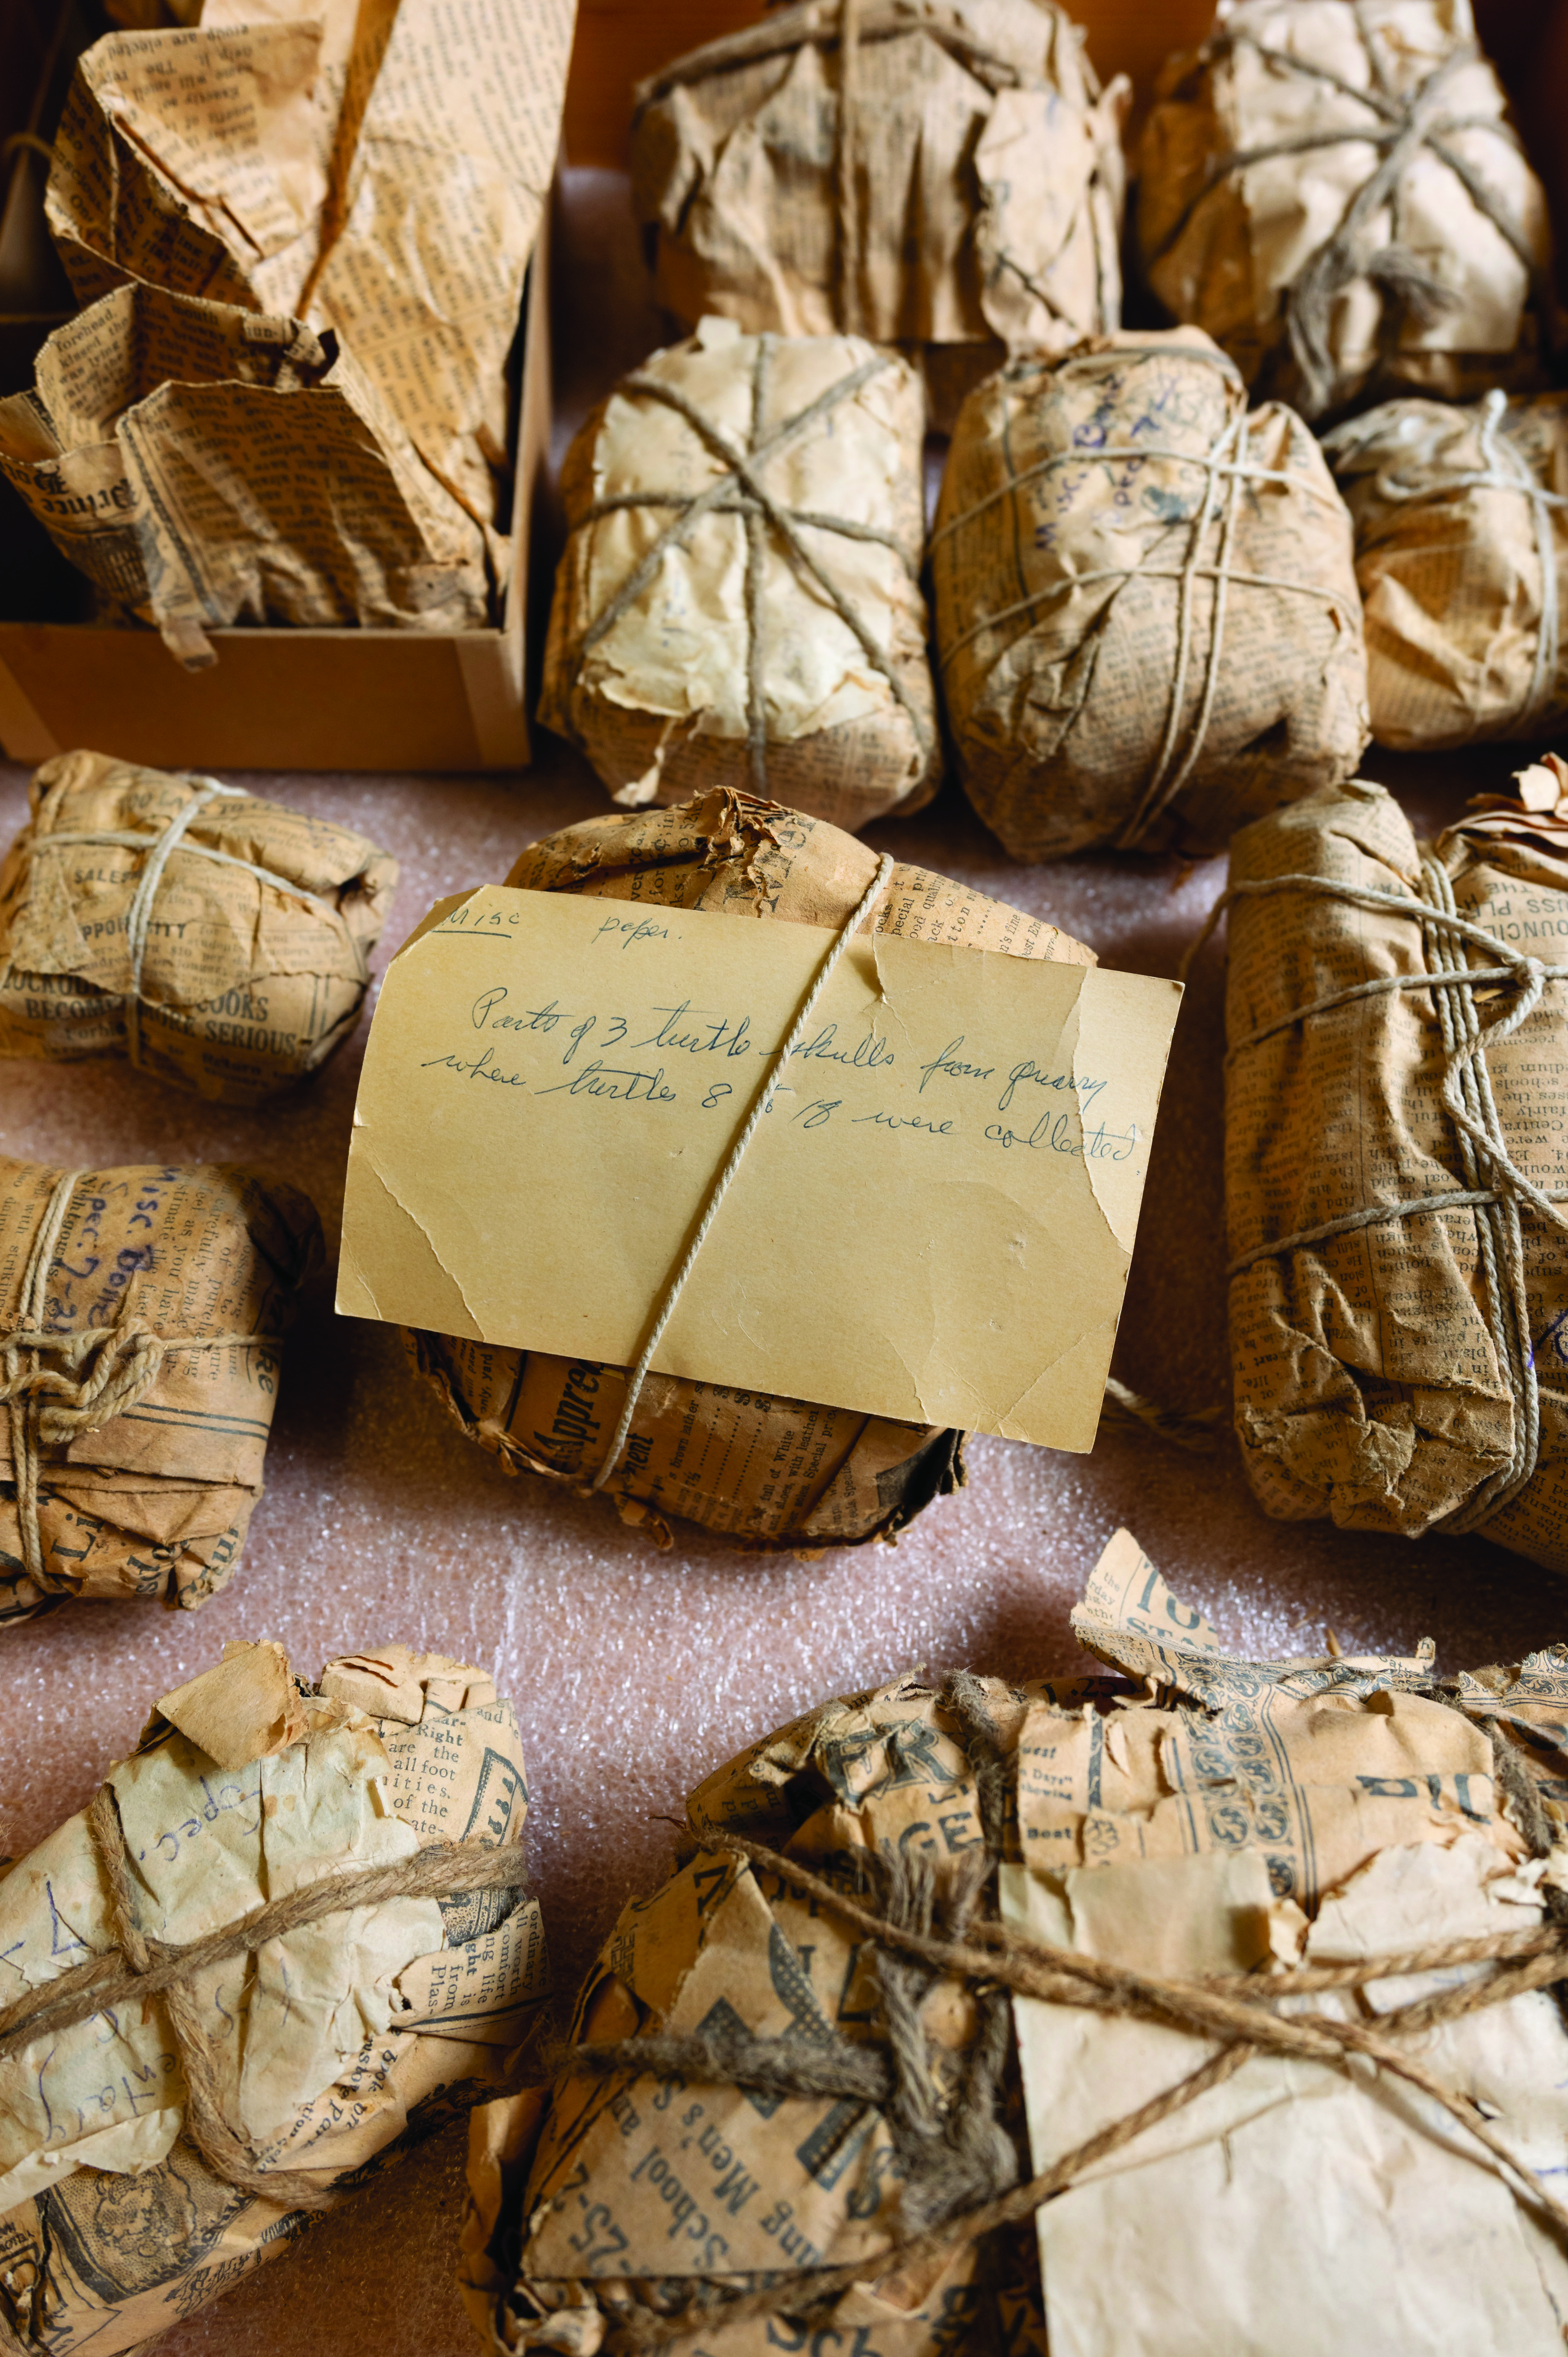 A collection of fossils in the U of A Dino Lab, wrapped in newspaper more than 100 years old.